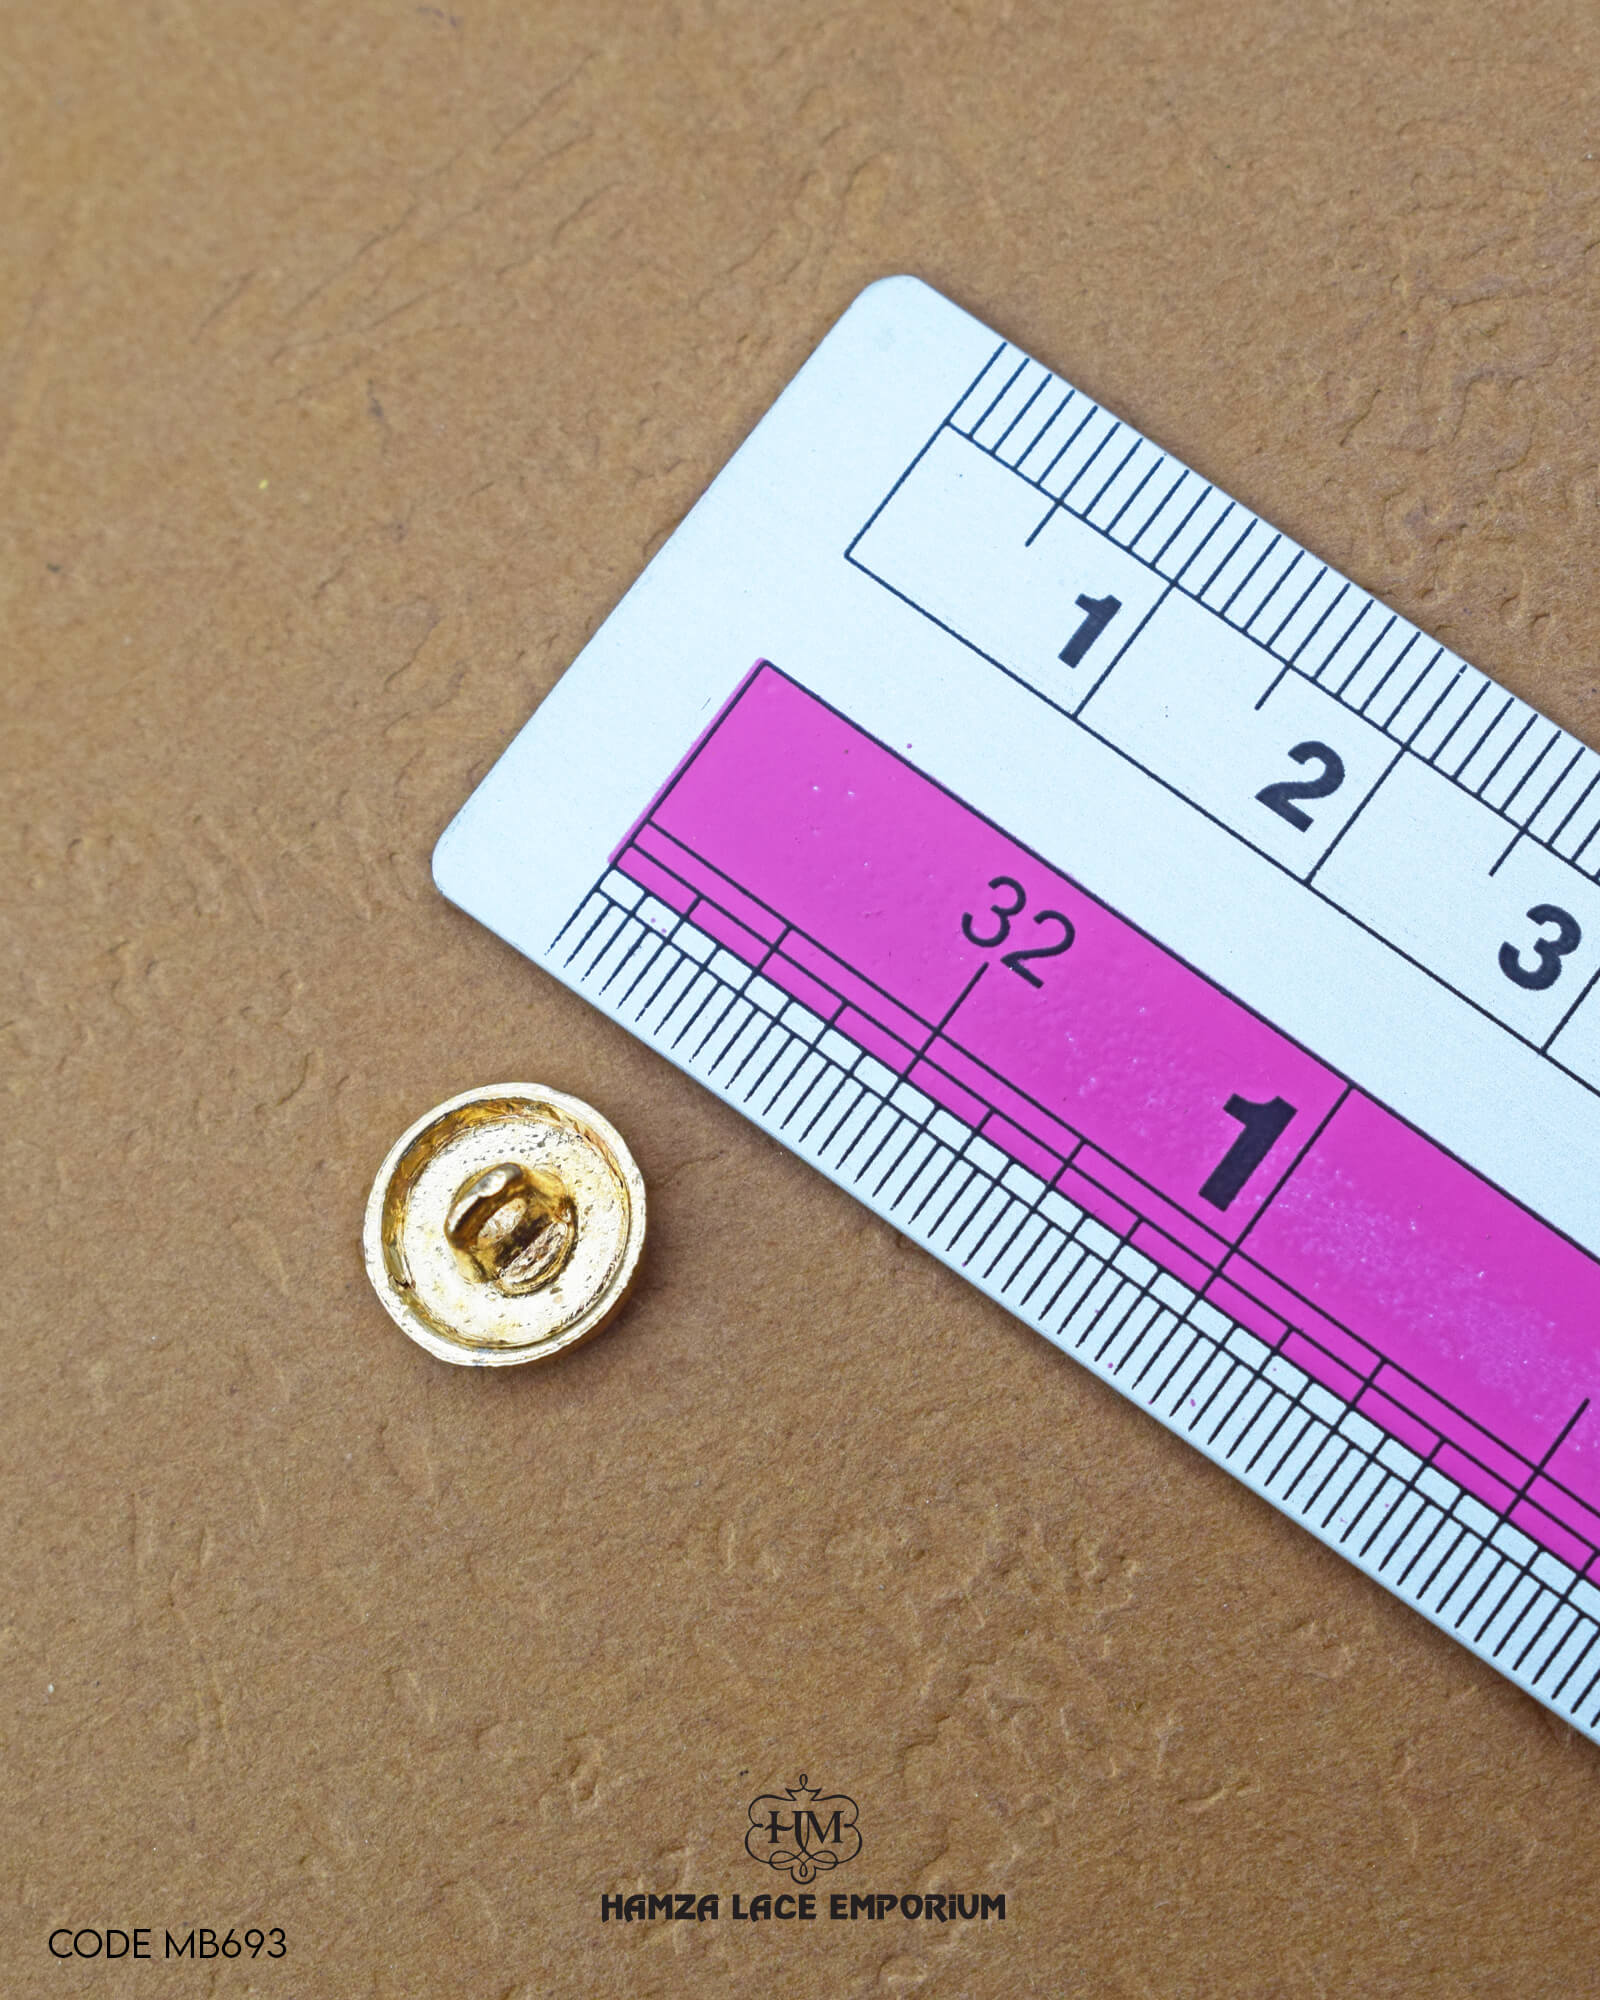 The size of the 'Metal Suiting Button MB693' is measured by using a ruler